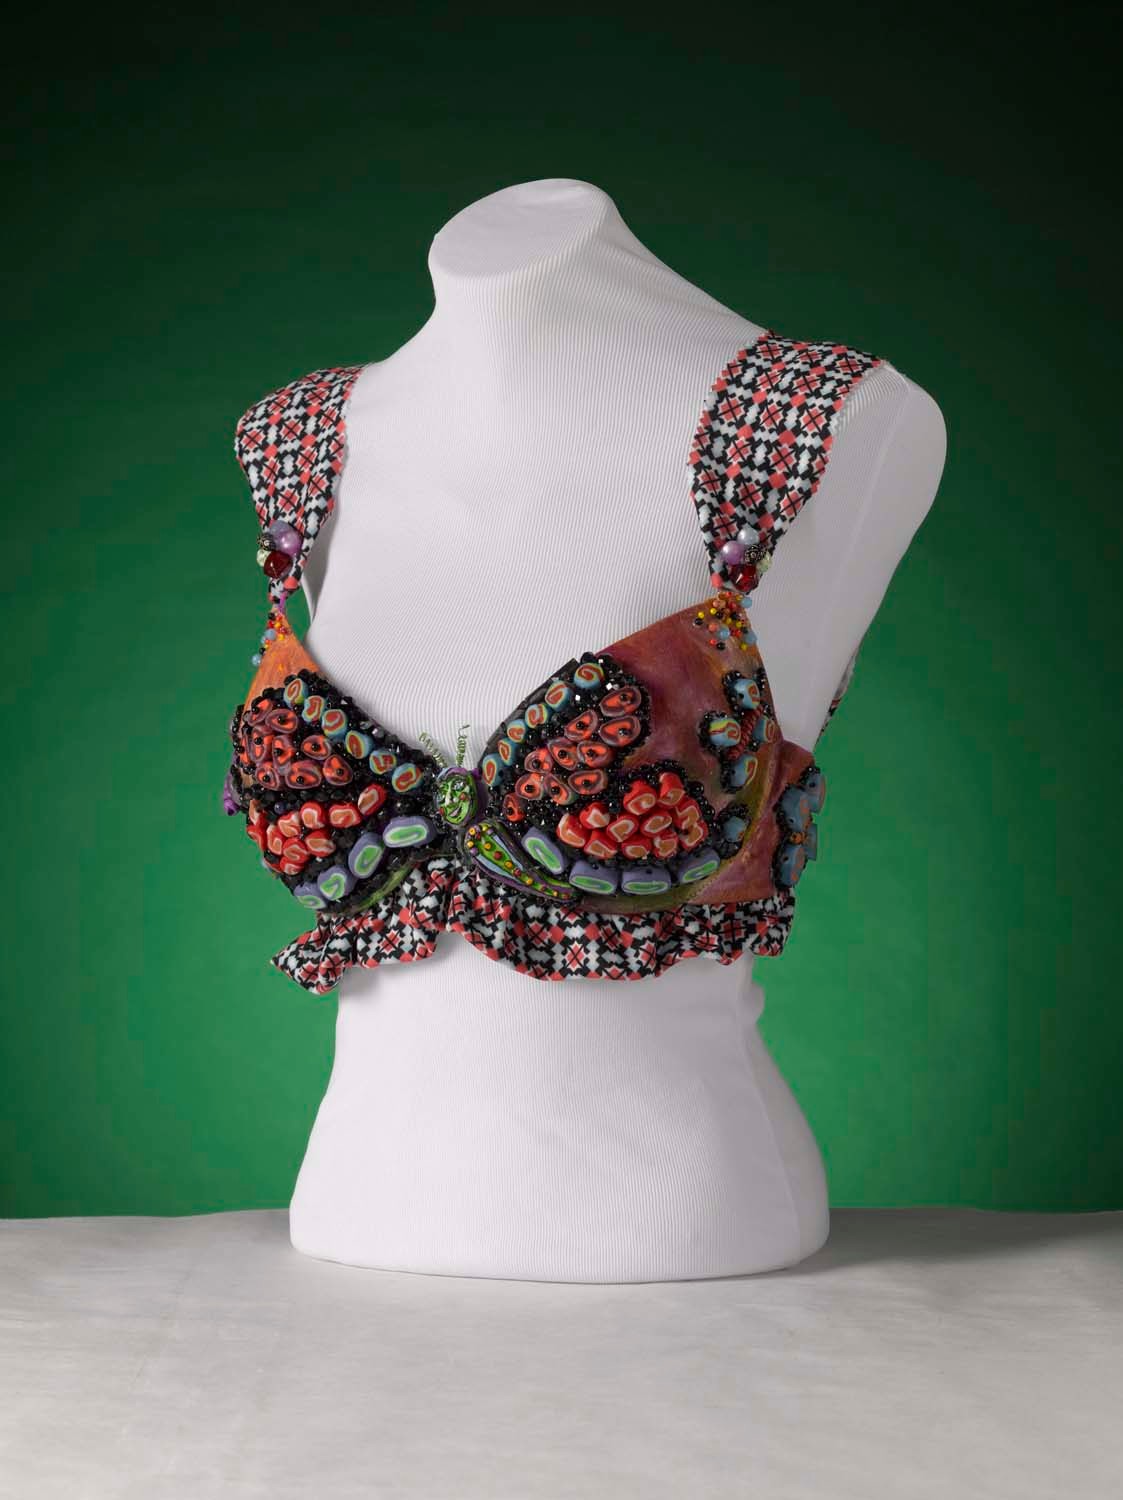 Artist creates nature-themed bras for Natural Land Institute benefit